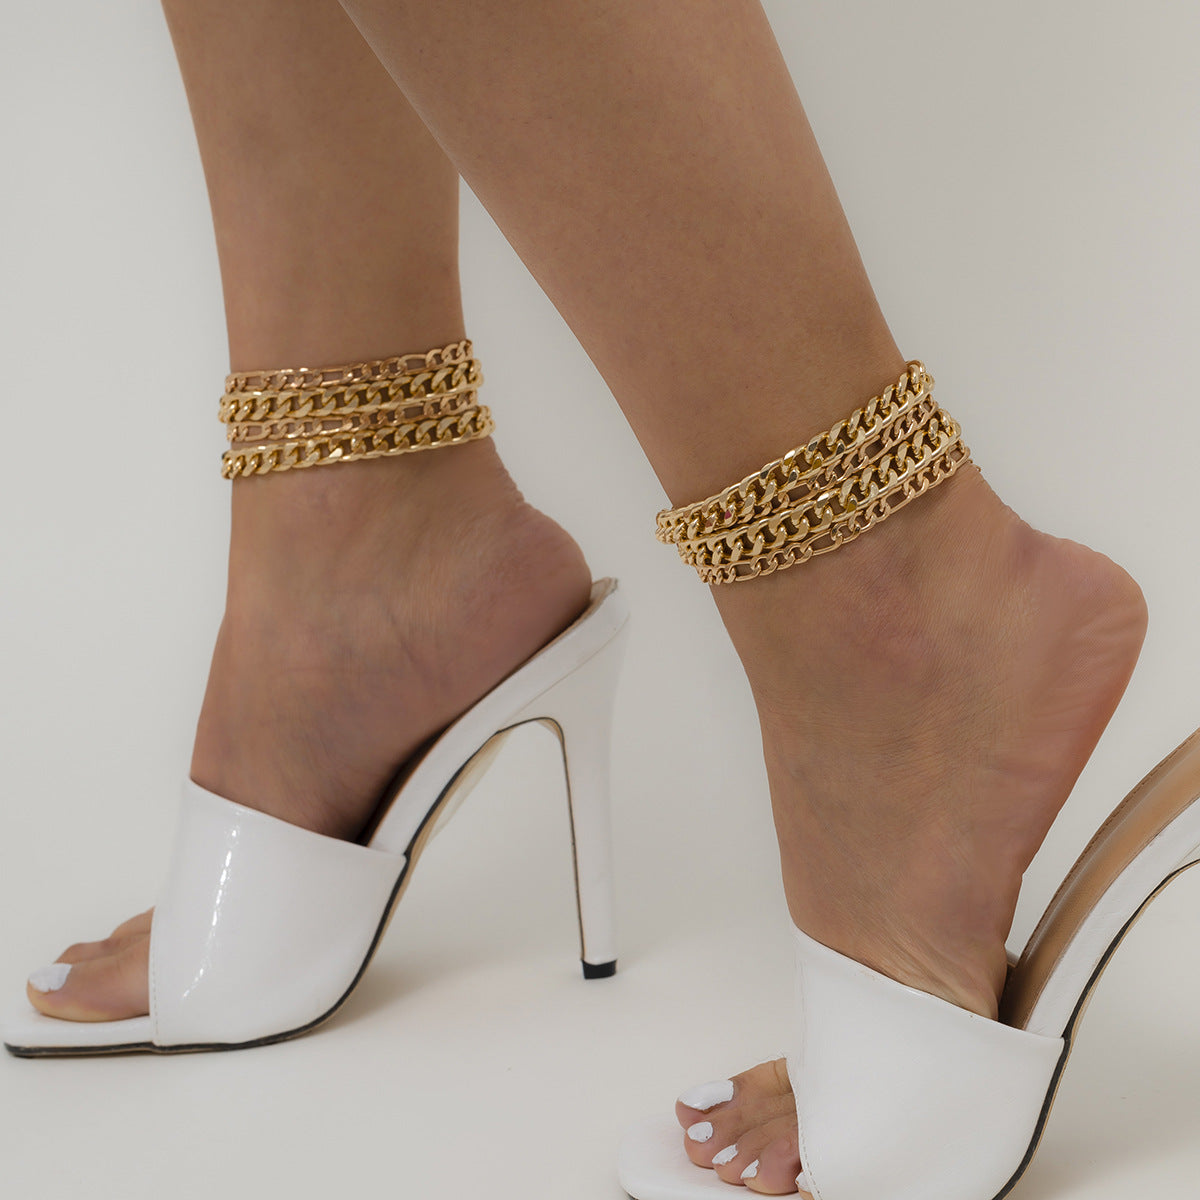 Punk Simple Metallic Thin Chain Anklet